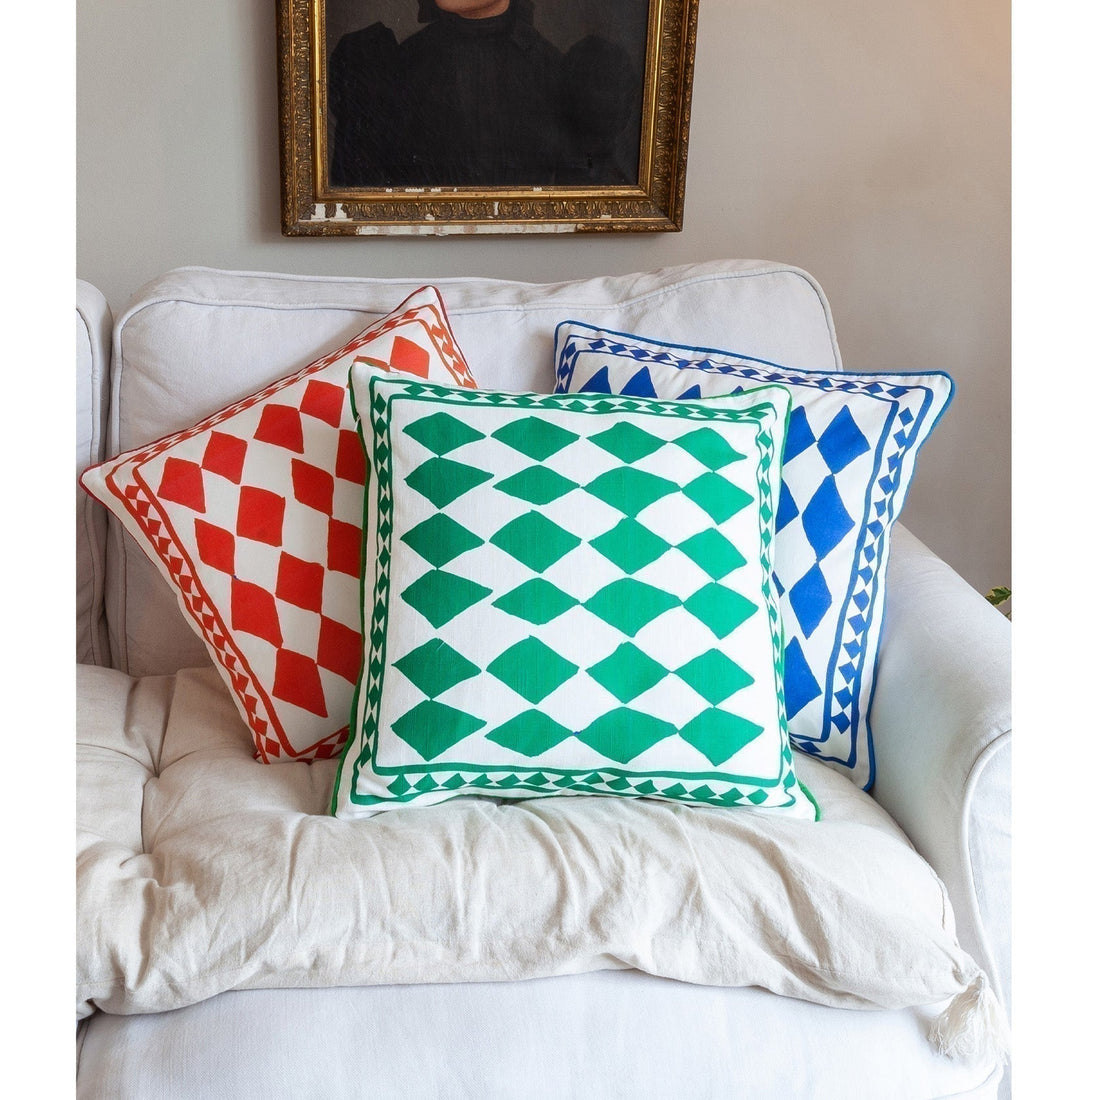 Jessica Russell Flint printed linen cushion cover 